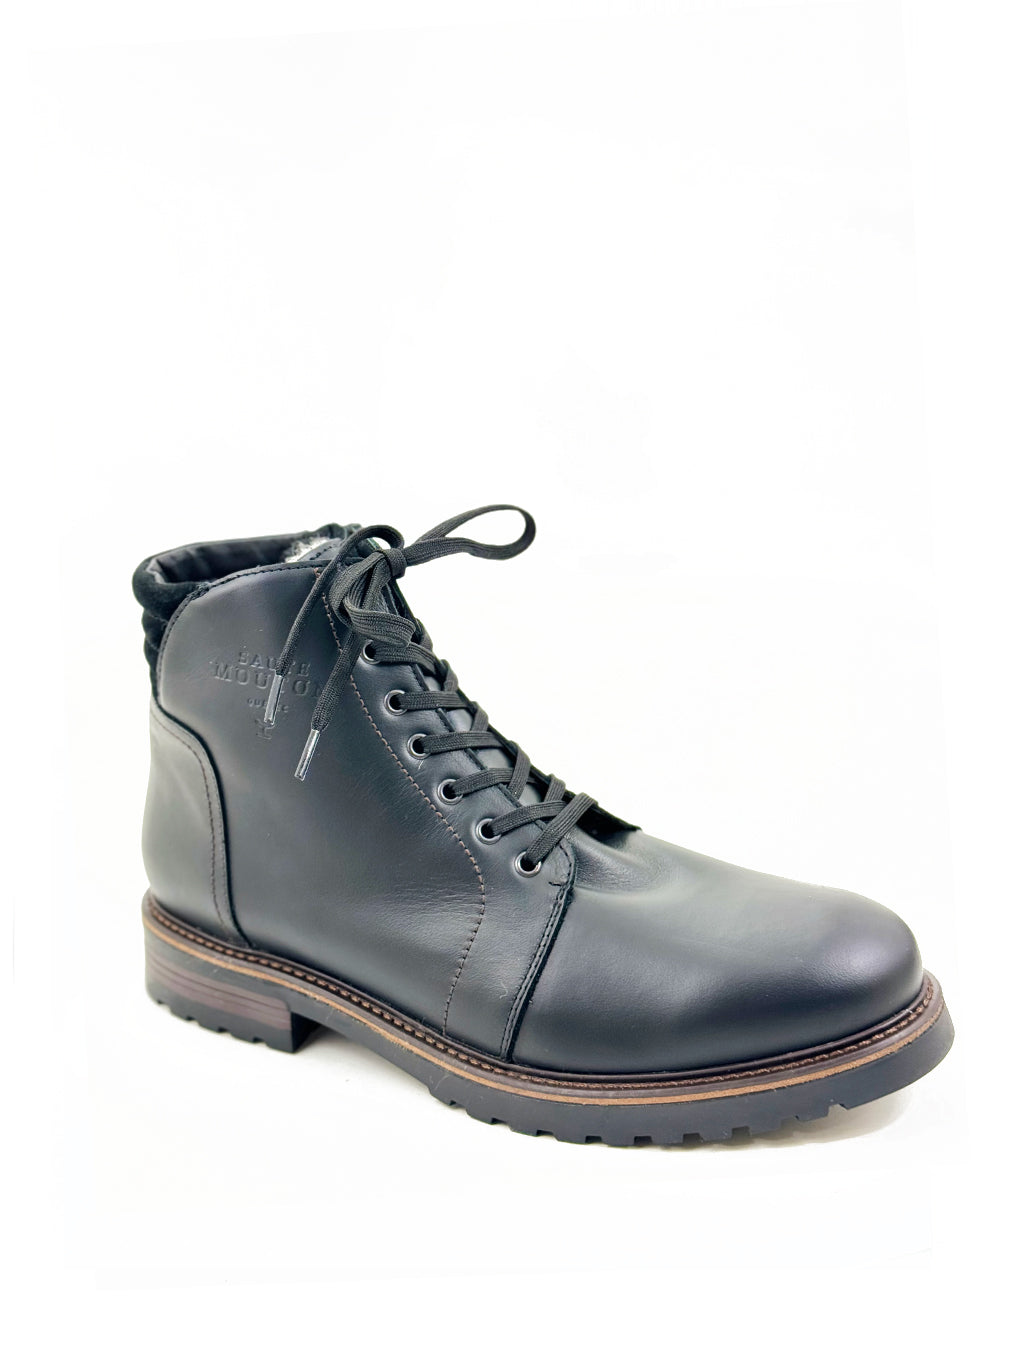 Clement Black Leather - 2567 - Army